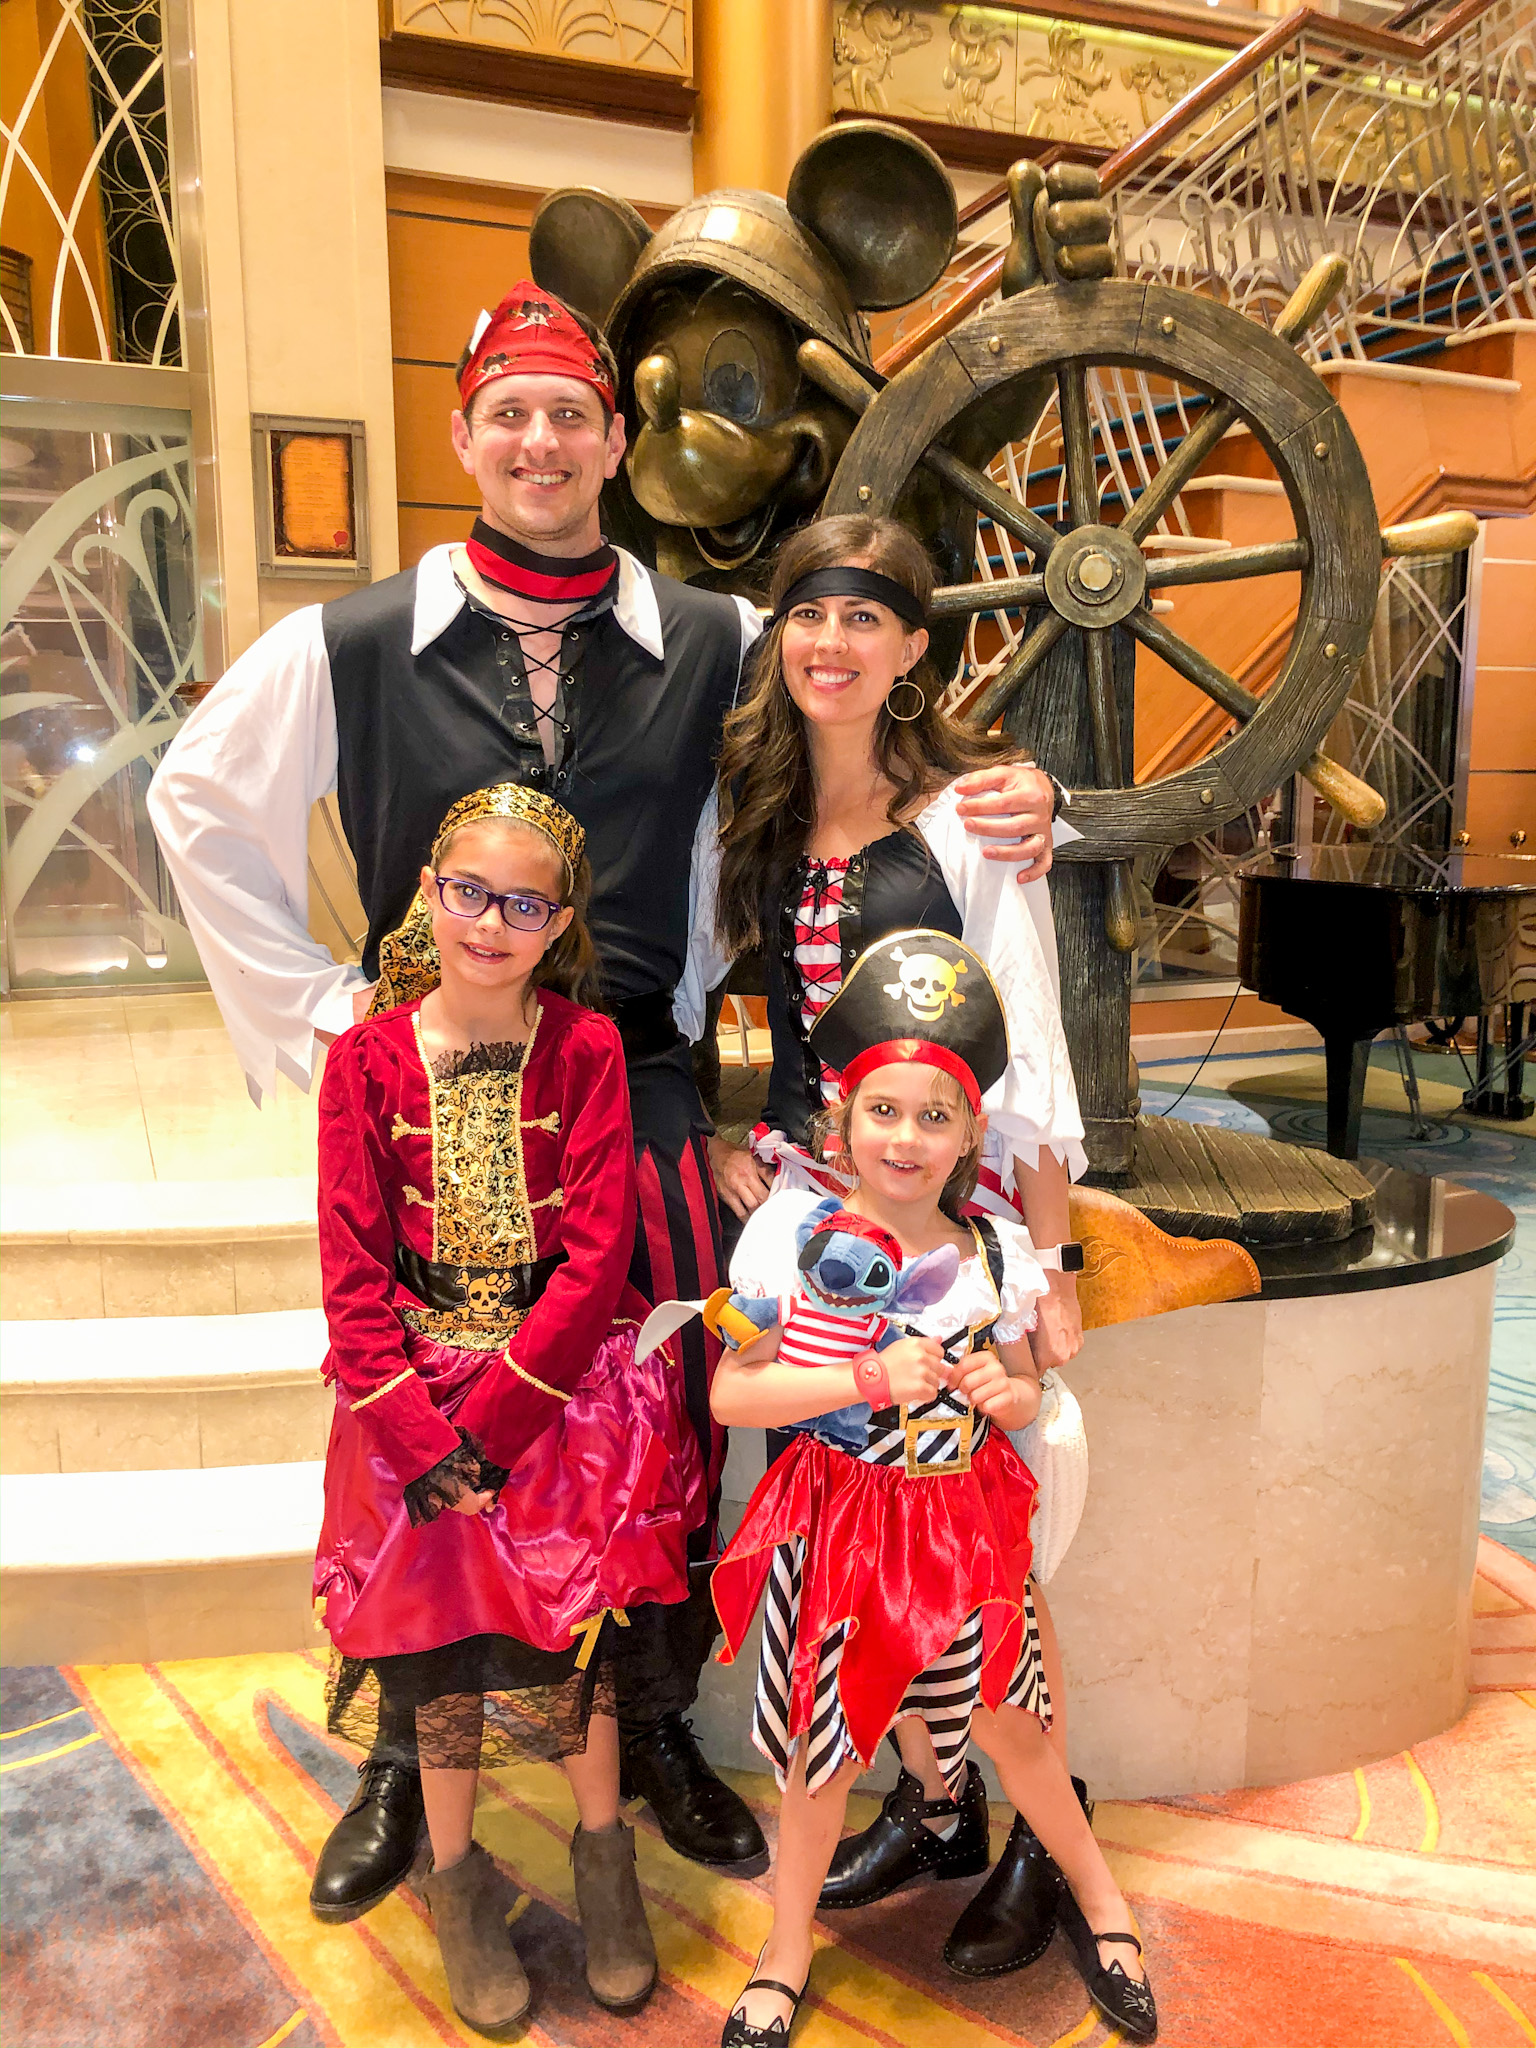 Pirate Night on Disney Cruise - The Healthy Mouse